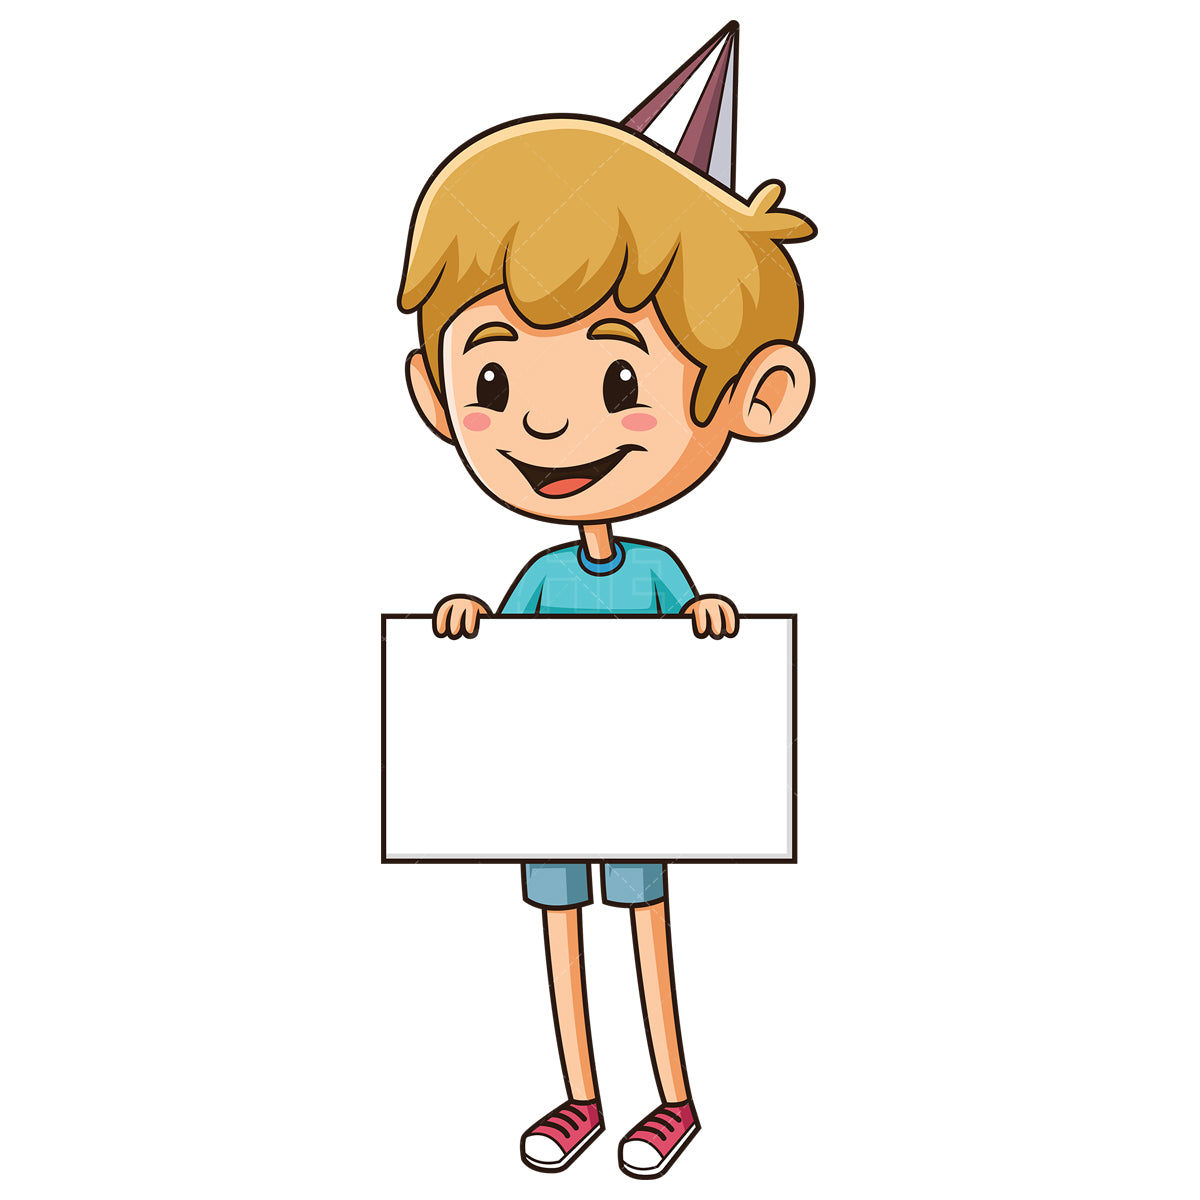 Royalty-free stock vector illustration of a birthday boy with blank sign.